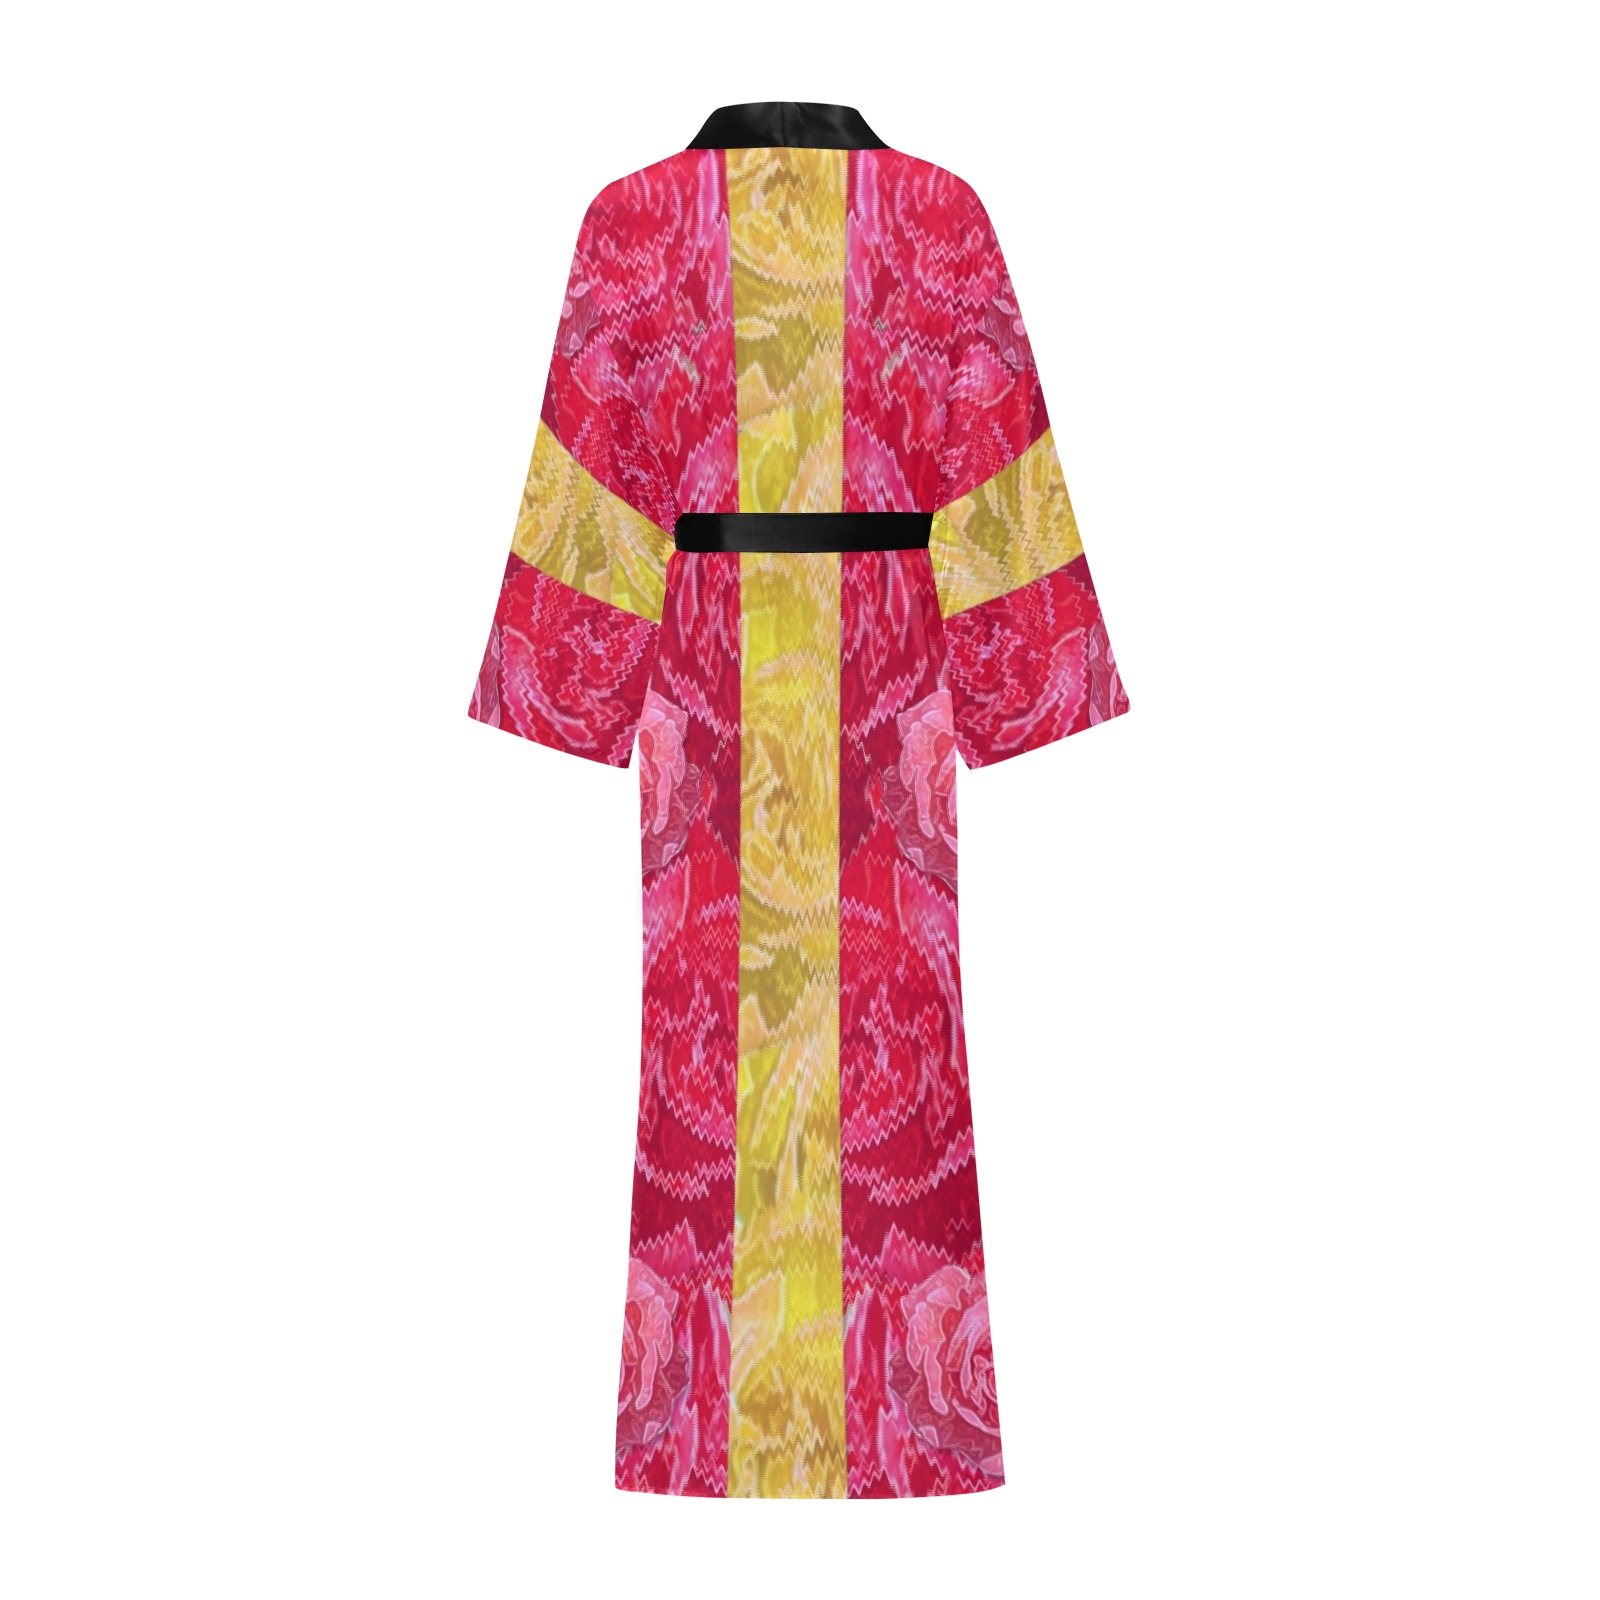 Rose and roses and another rose Long Kimono Robe